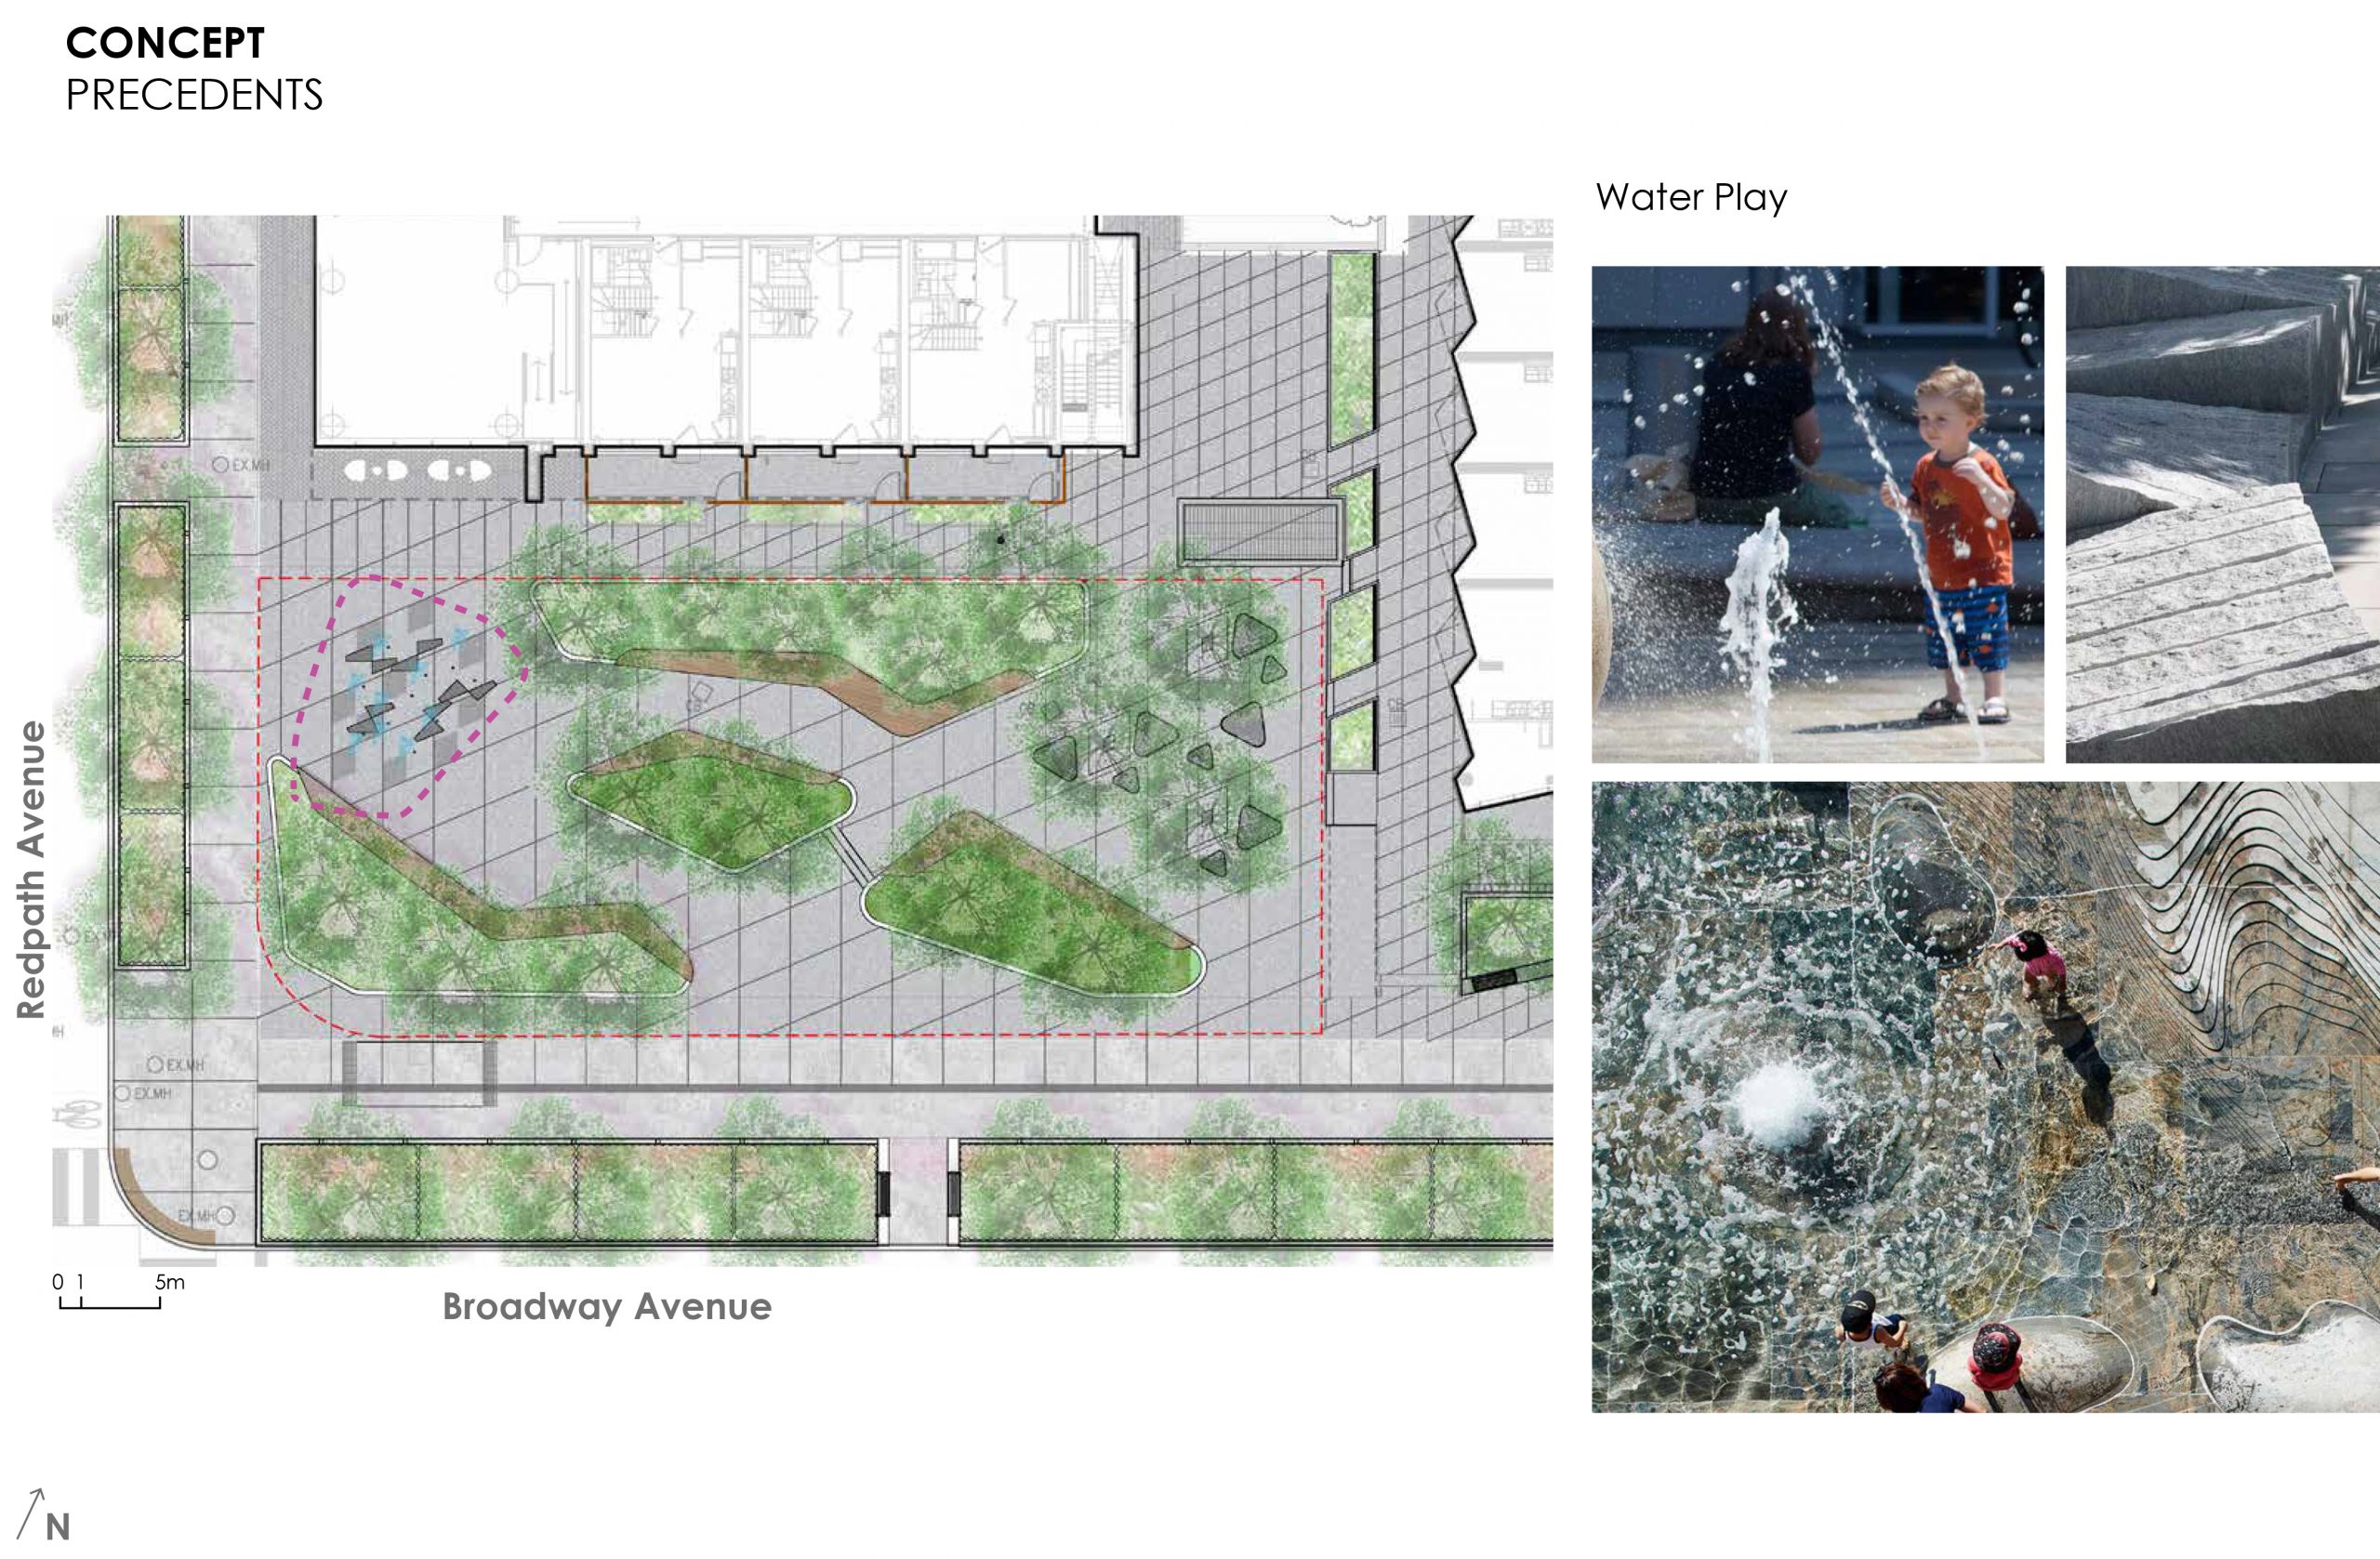 An image that provides some examples of the water play elements proposed for the new park. This includes an image of an in-ground fountain.